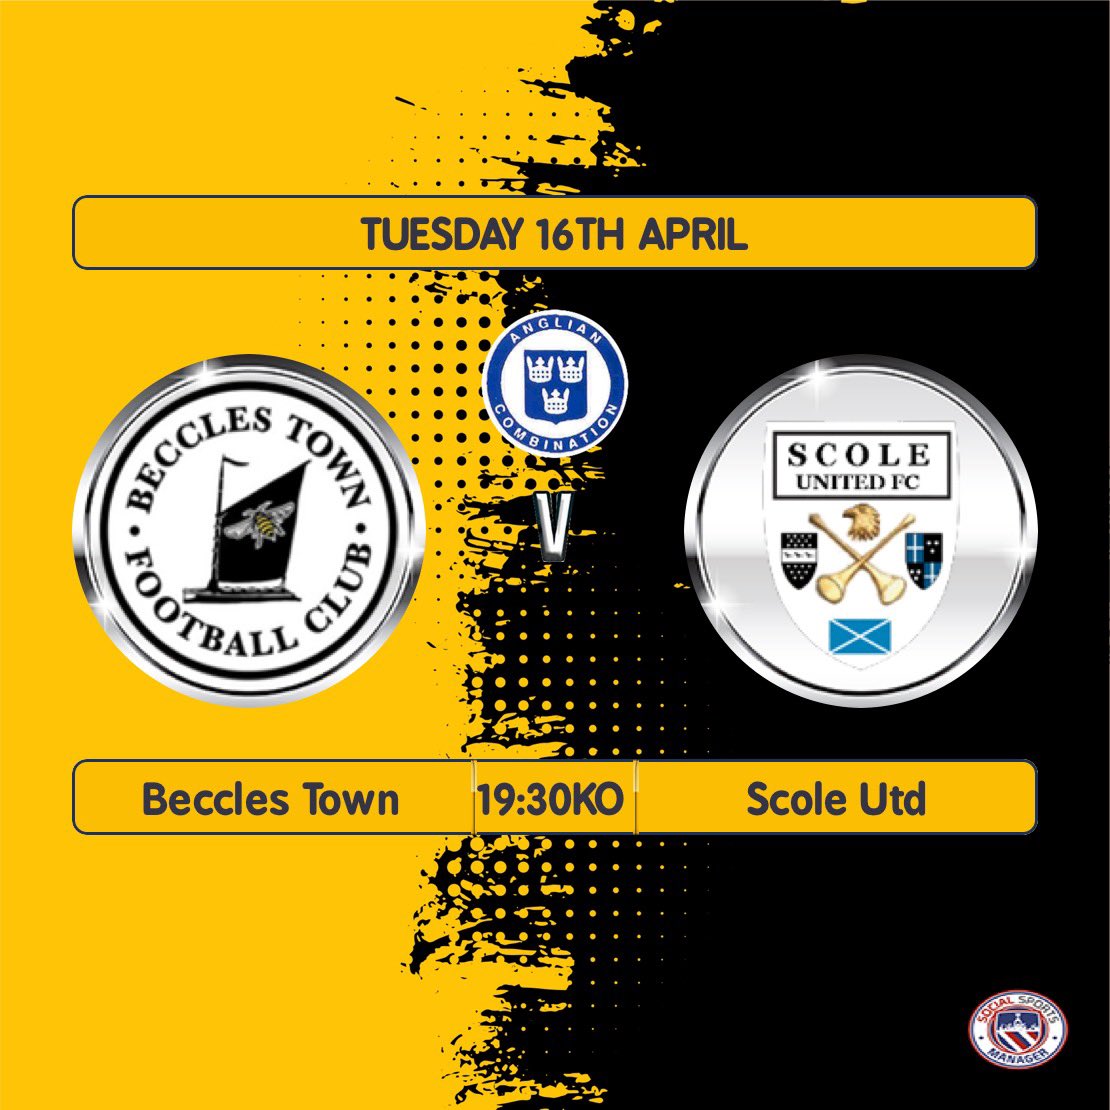 Tuesday night football 😍 away to @BecclesFC under the lights! Not been good enough the last couple of games so tomorrow night needs to be a lot better from the lads!! Any support is appreciated 🍻💛🖤 #UTS